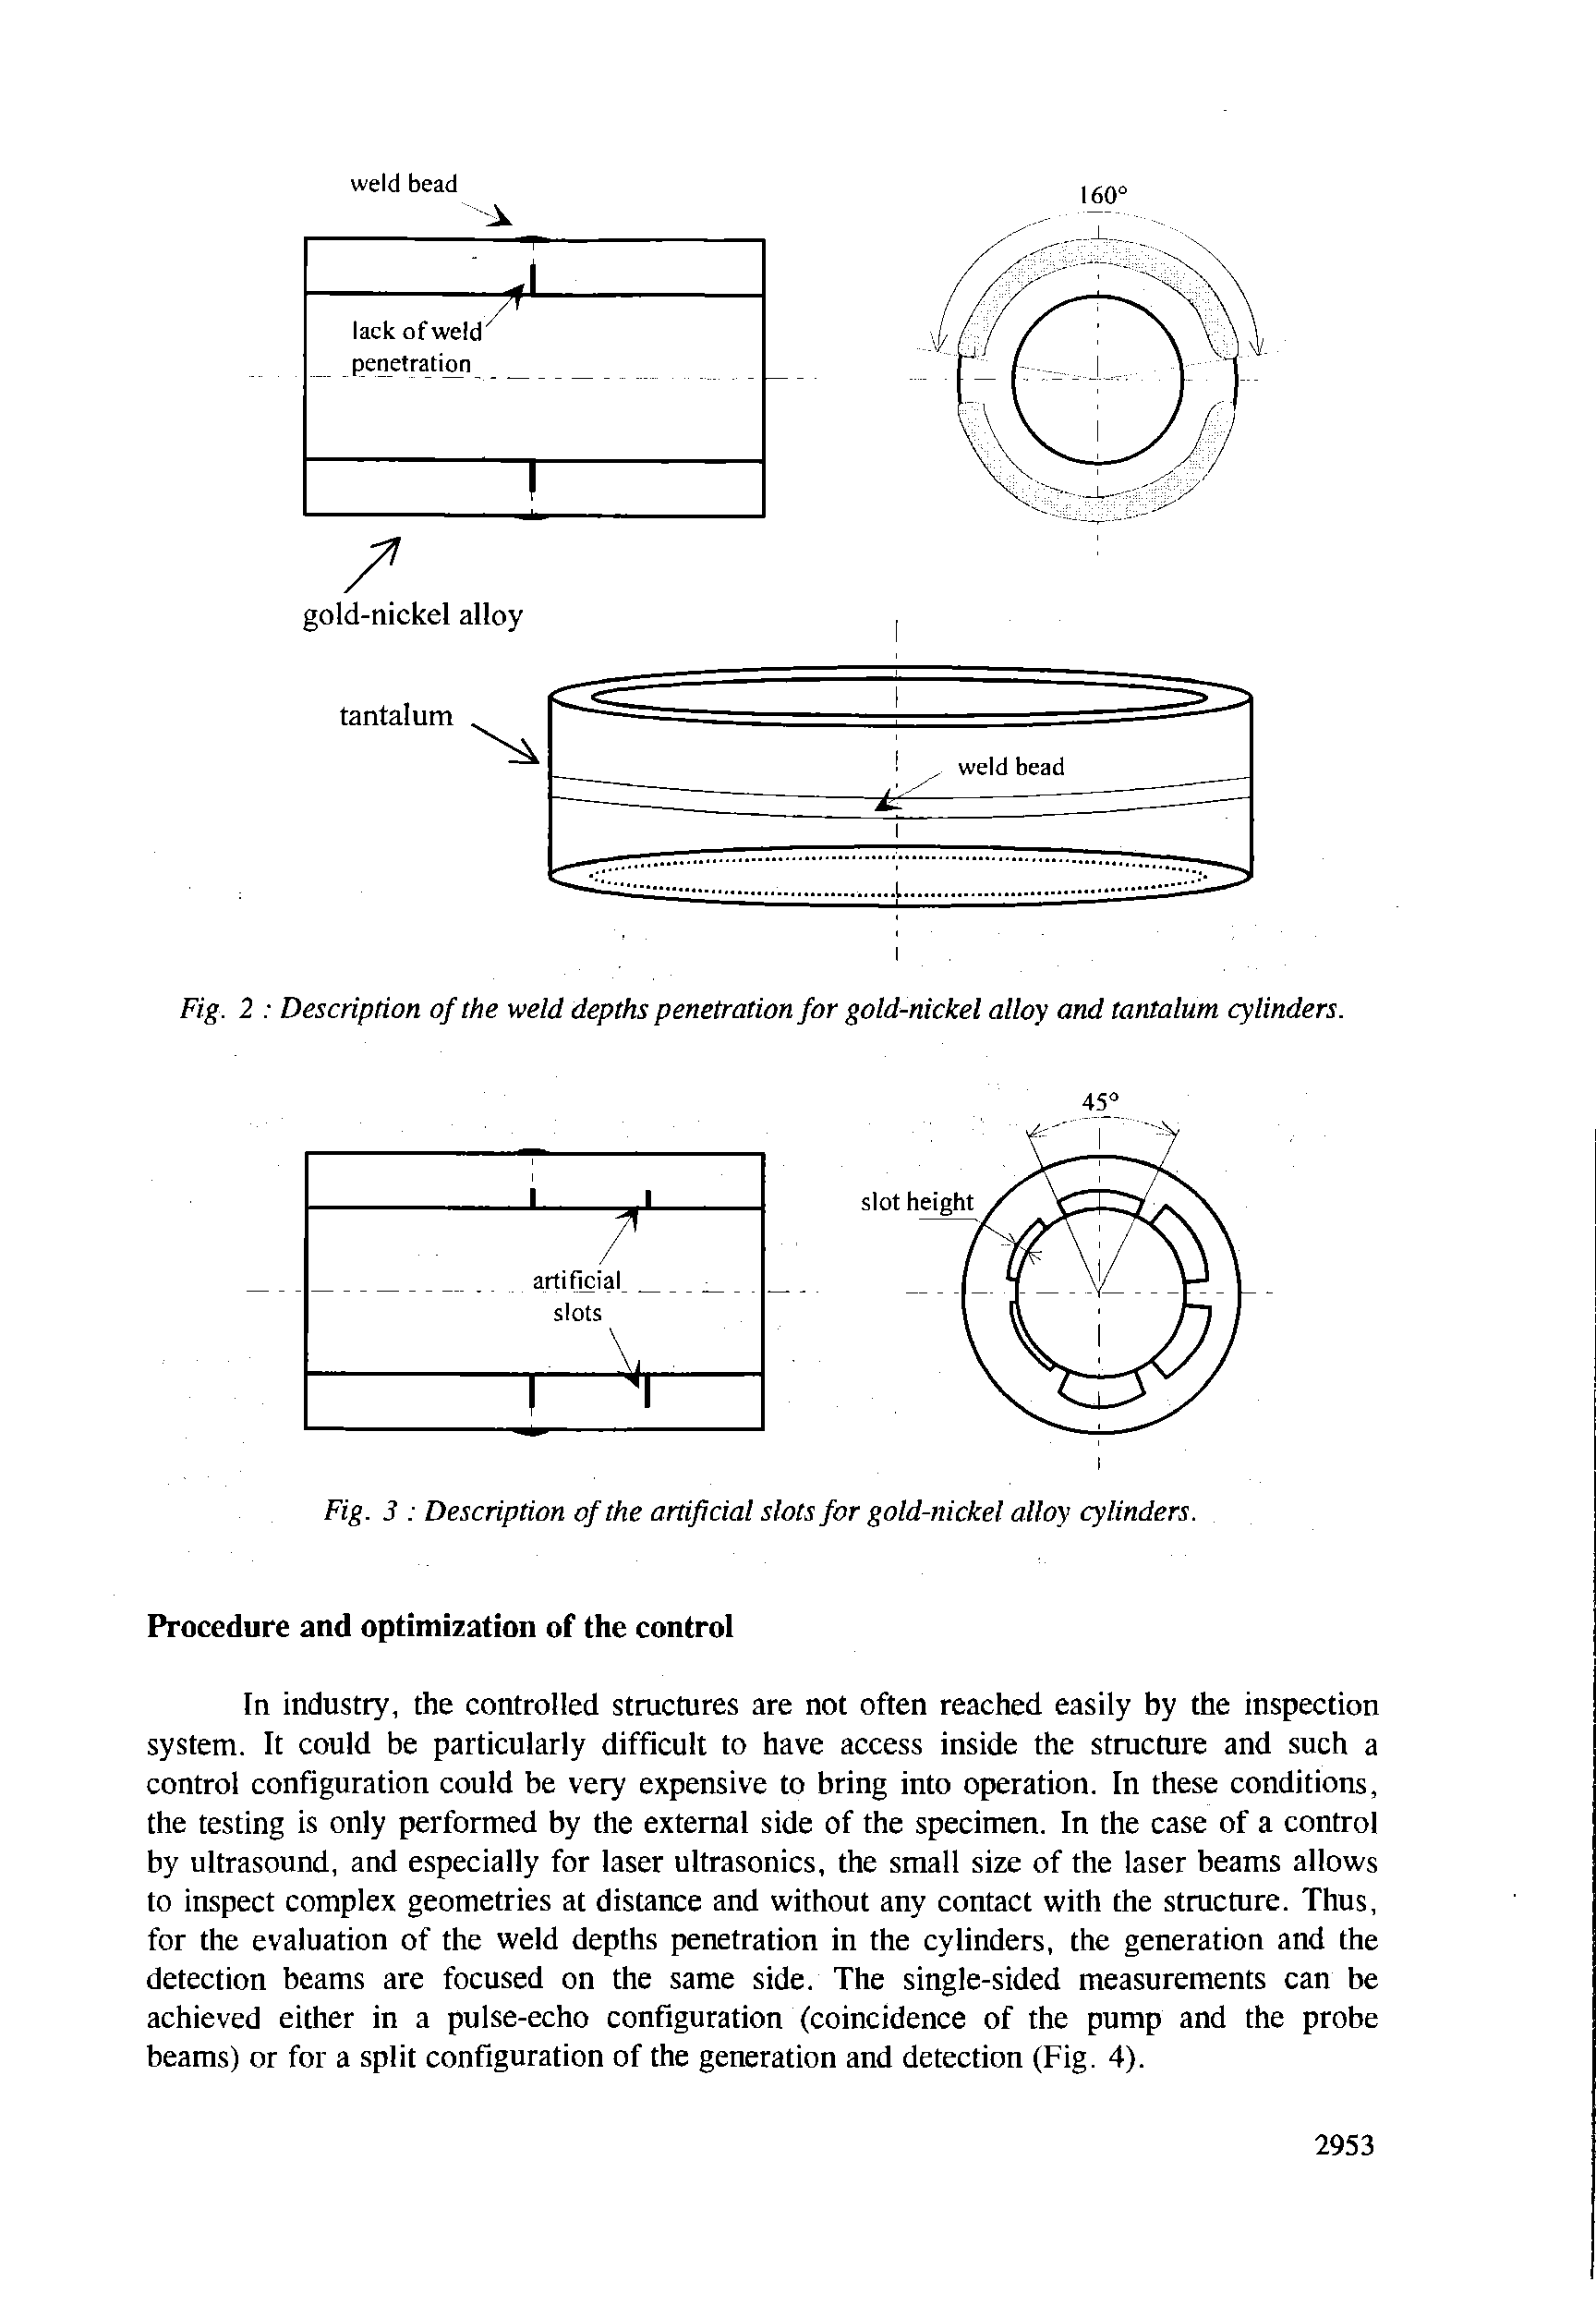 Fig. 2 Description of the weld depths penetration for gold-nickel alloy and tantalum cylinders.